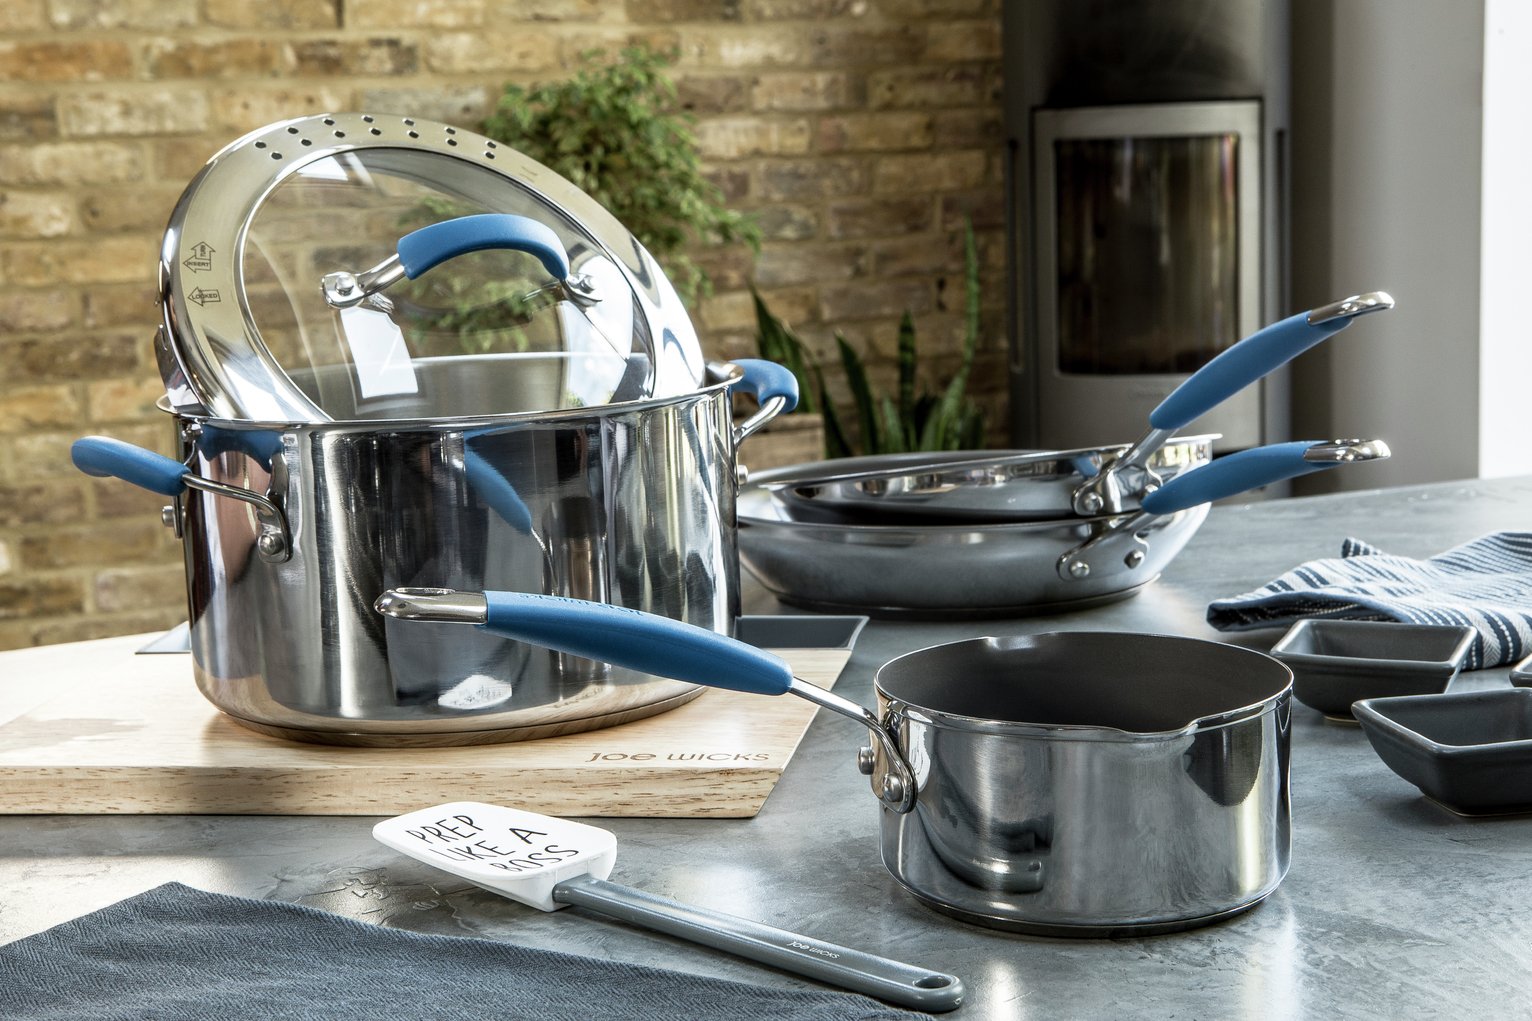 Joe Wicks Quick and Even Stainless Steel 3 Piece Pan Set Review